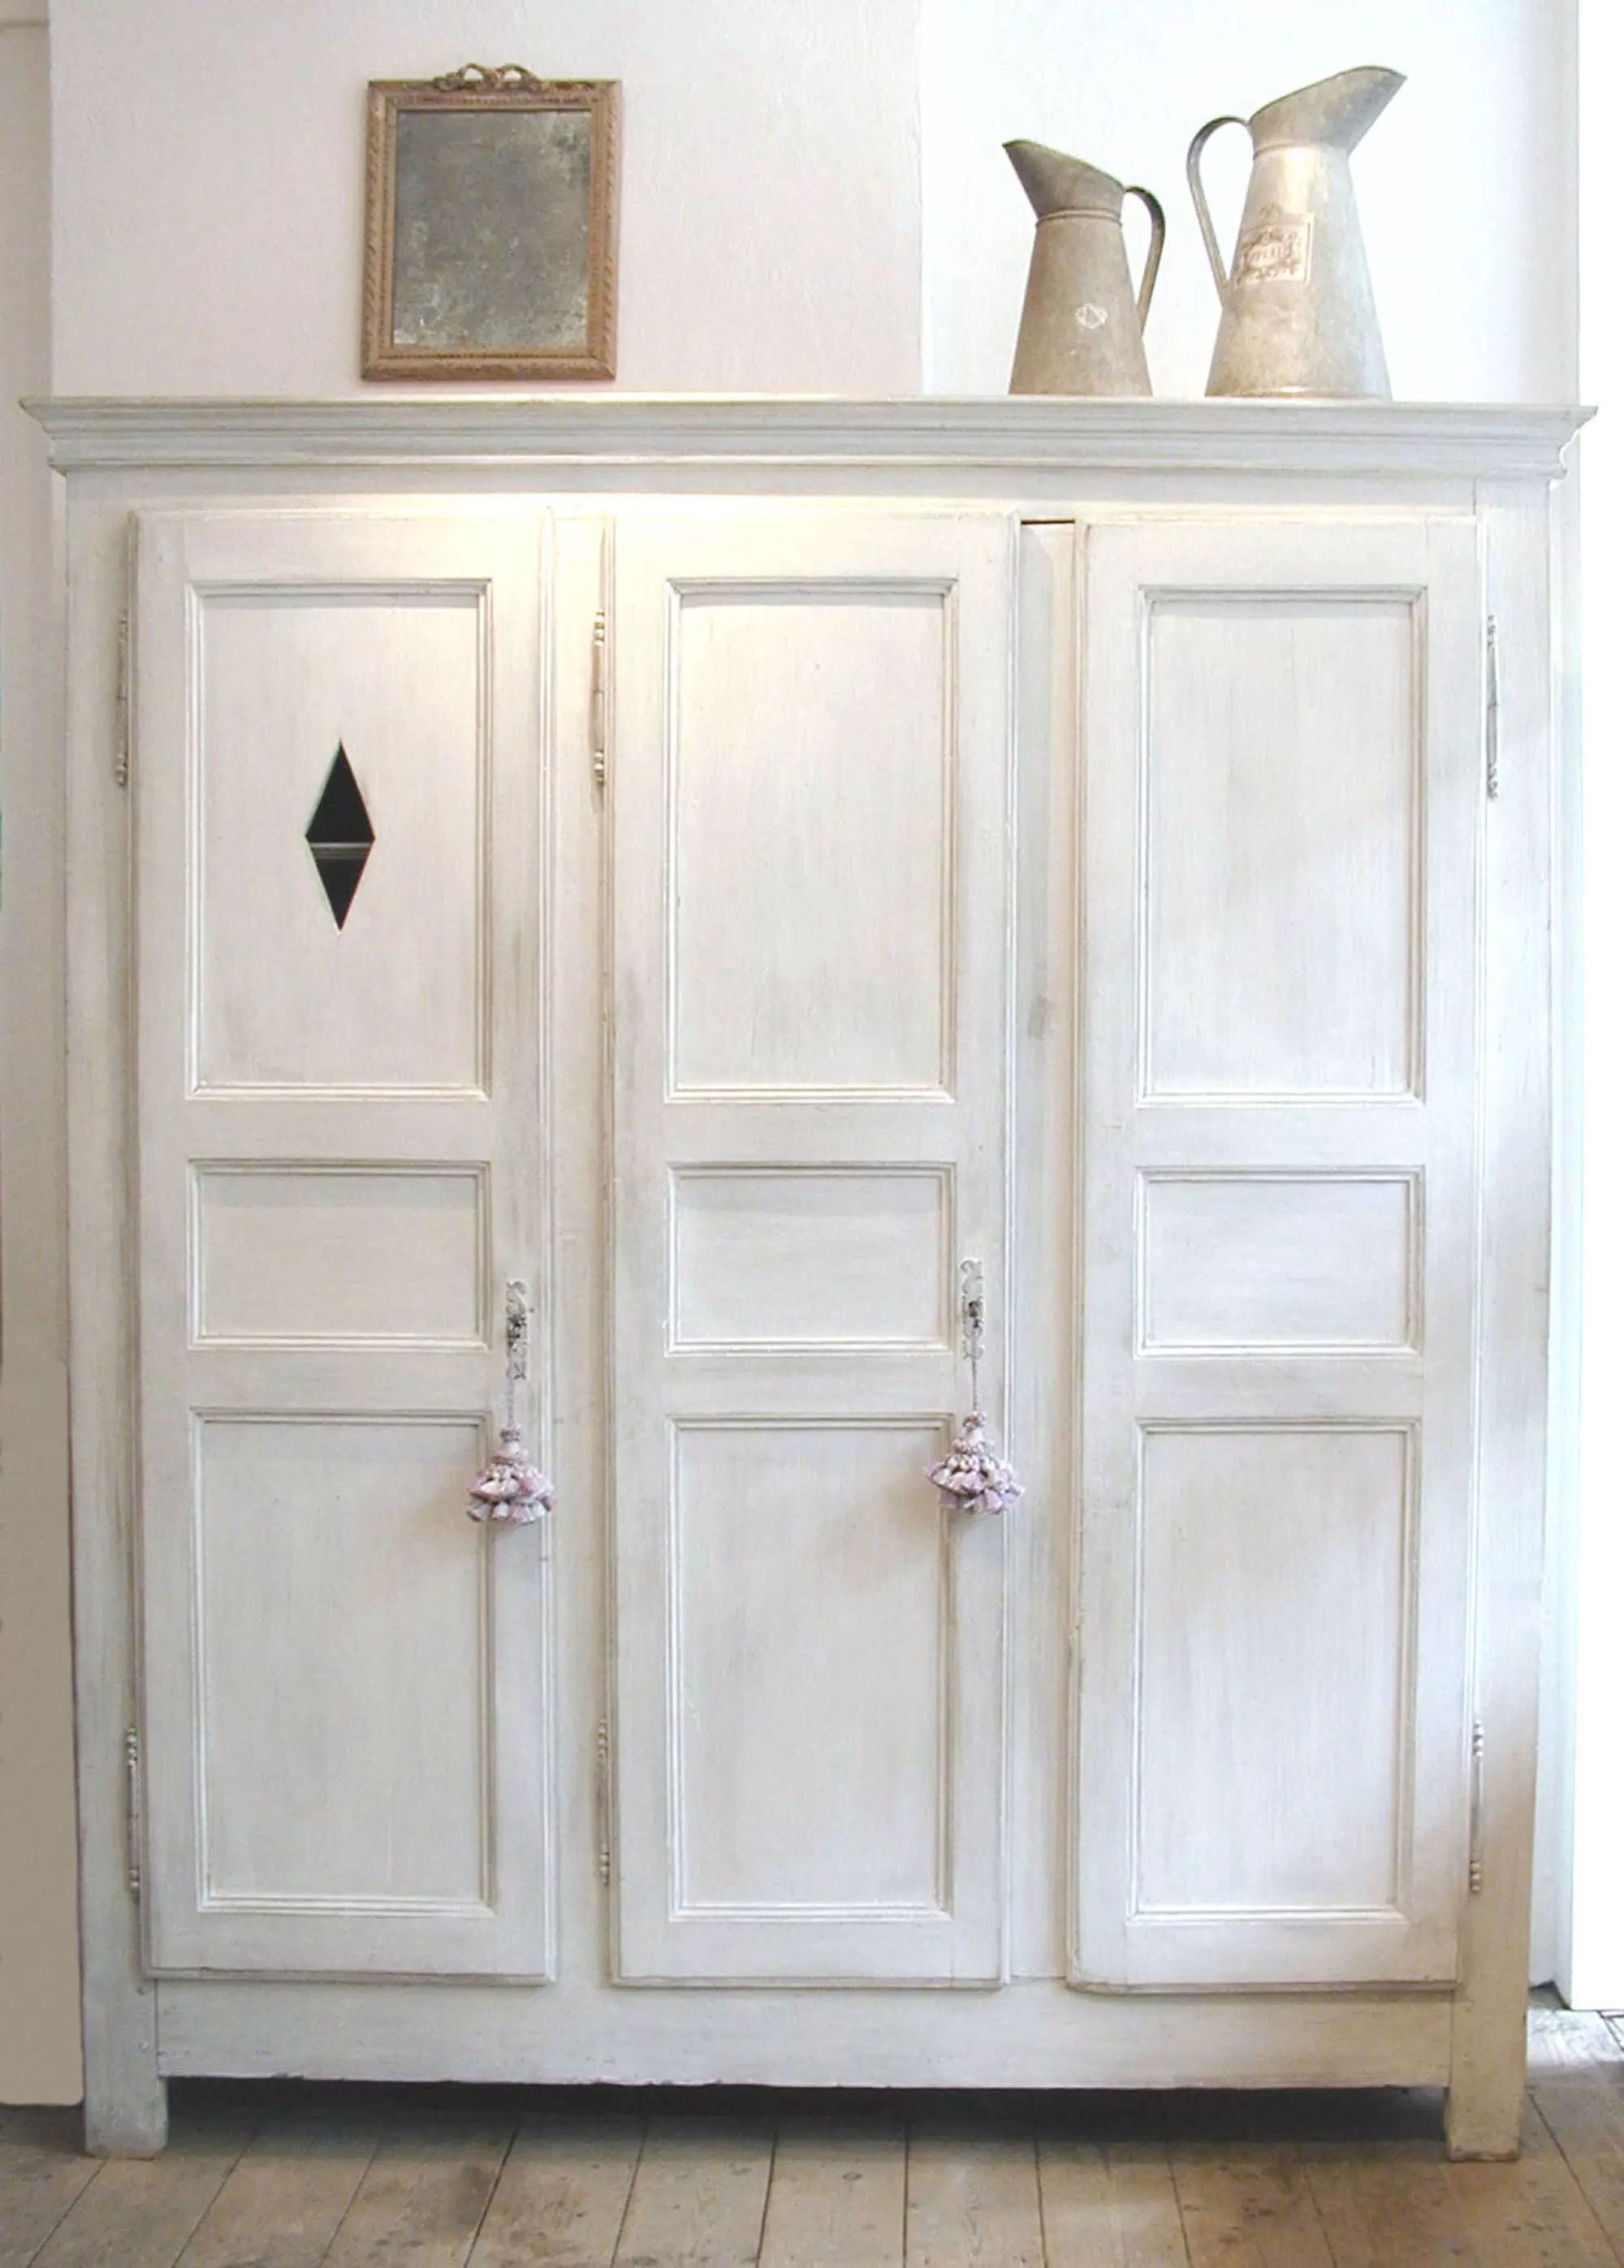 French 18th Century White 3 Door Armoire In Antique Wardrobes & Armoires Throughout 3 Door French Wardrobes (Gallery 11 of 20)